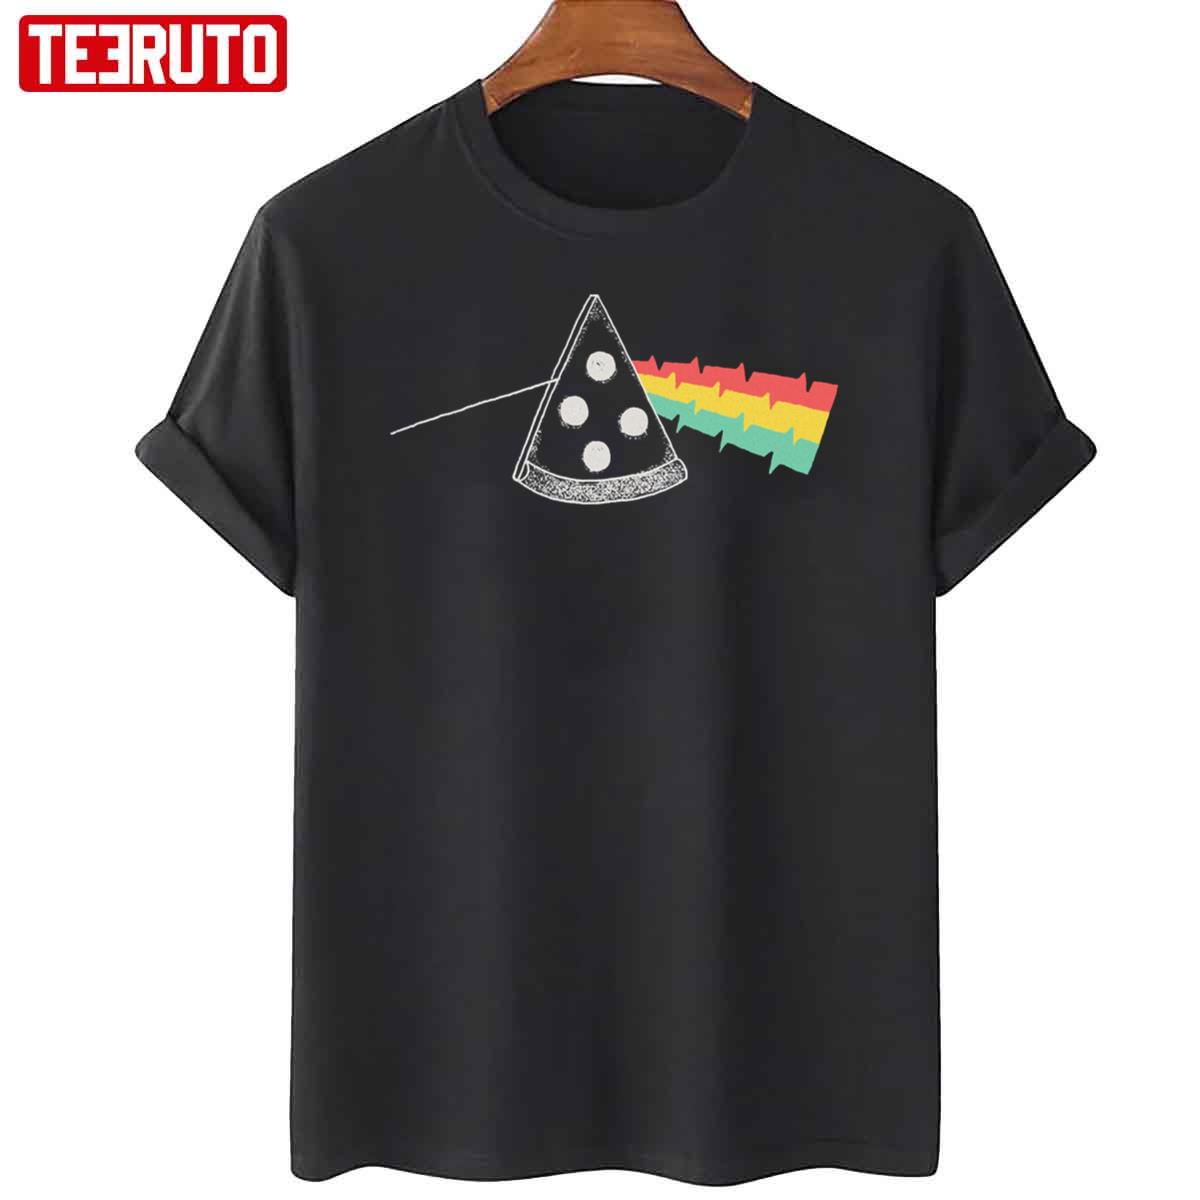 A Slice Of Life Pink Floyd Inspired Unisex T-Shirt